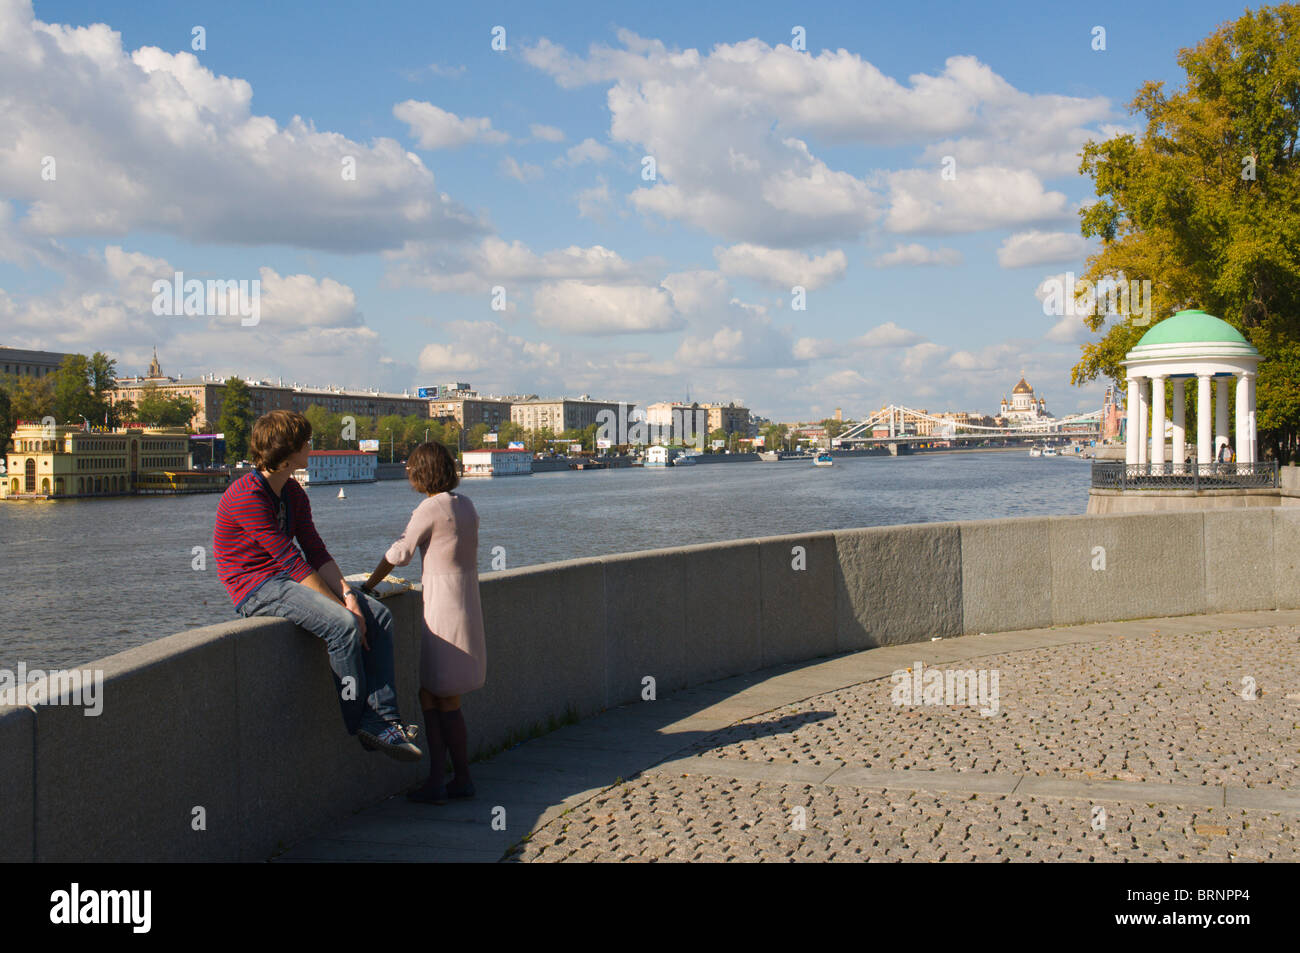 Views of River Moskva embankments at Gorky Park central Moscow Russia Europe Stock Photo